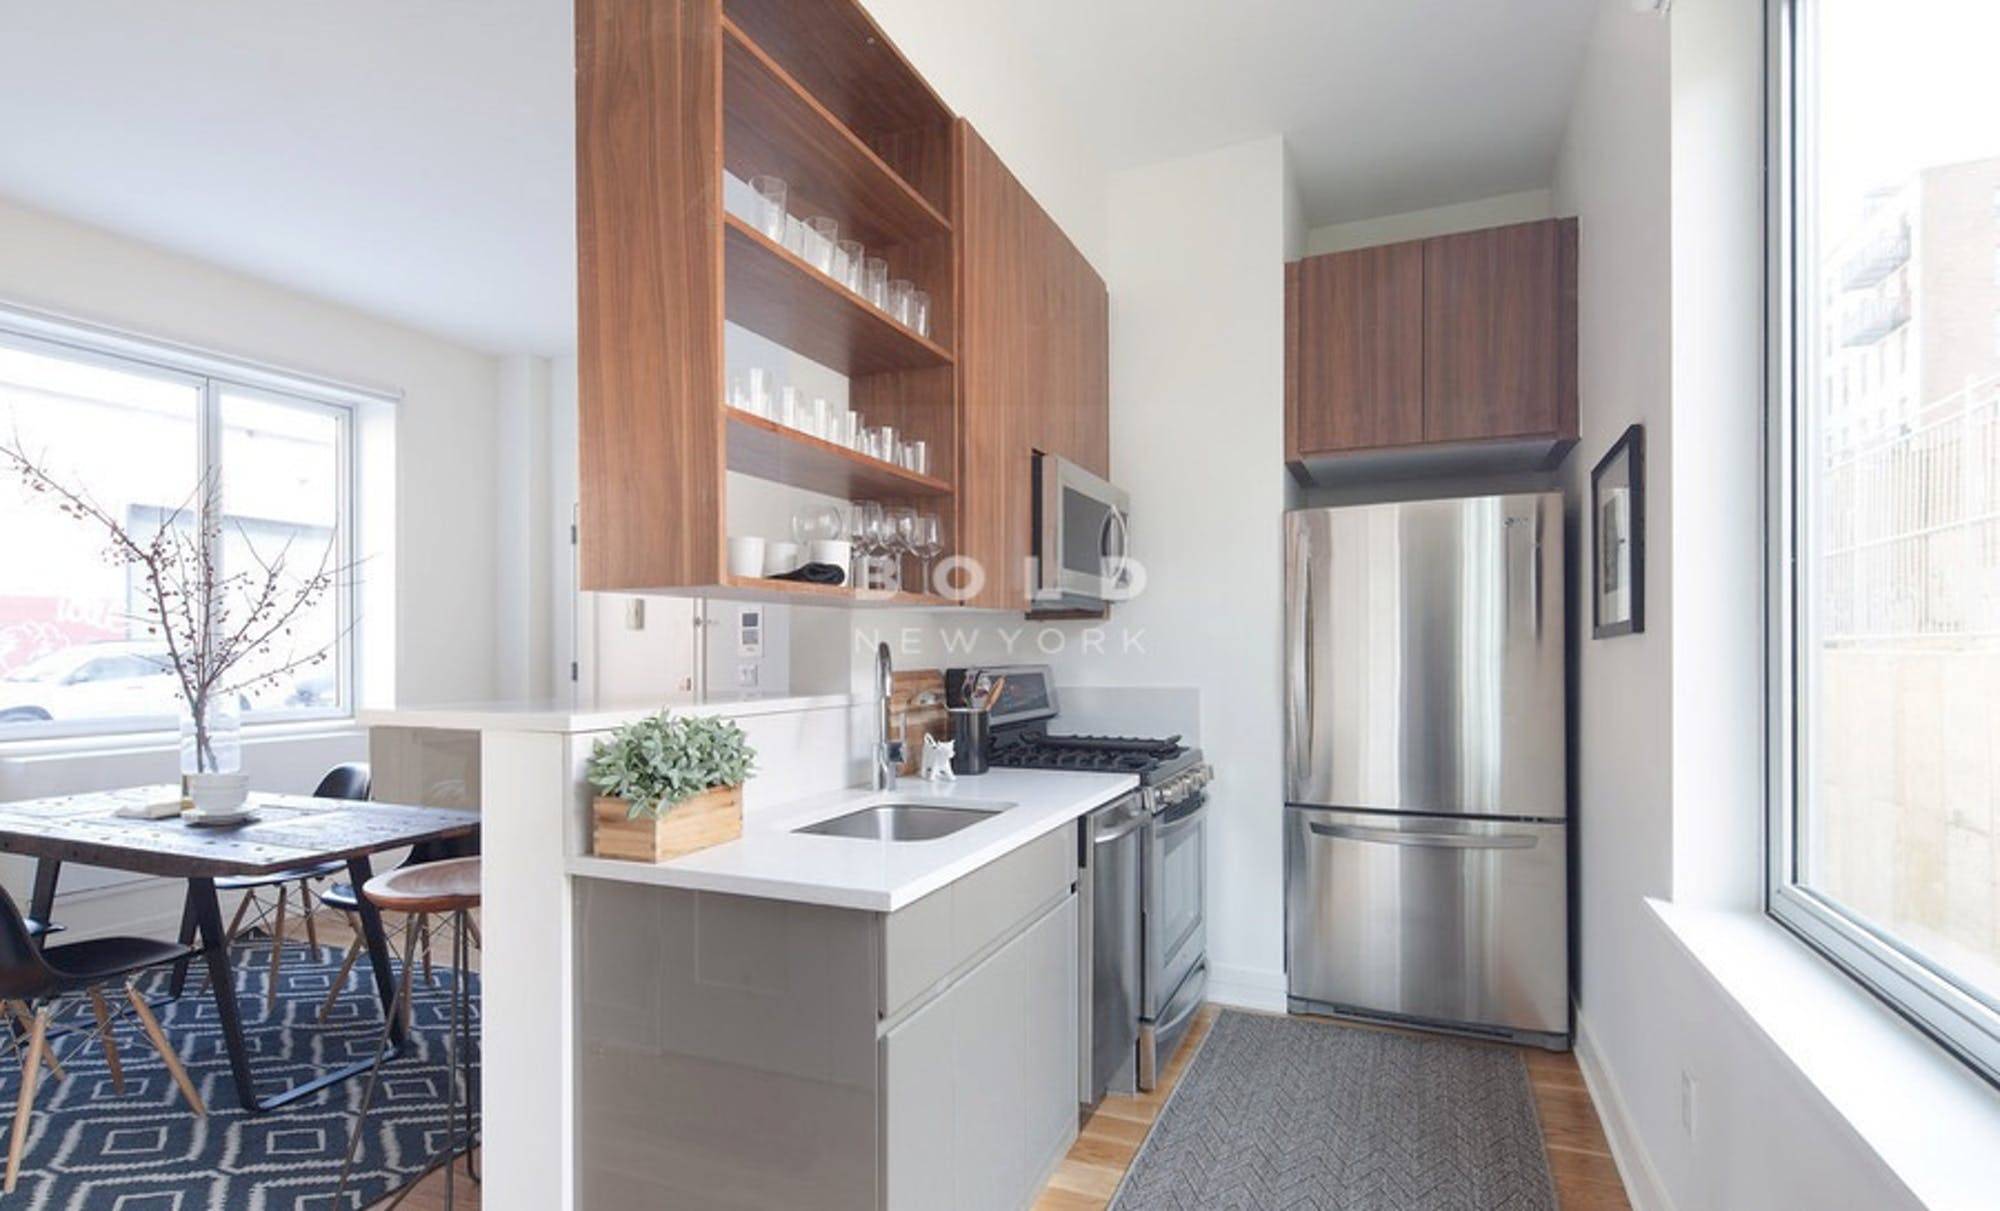 Rent Stabilized 1 Month Free 3988 net, 4350 gross Welcome to 224 Wythe Avenue Located off the beaten path in Prime Williamsburg, this luxury building sponsors loft residences unlike anything ...